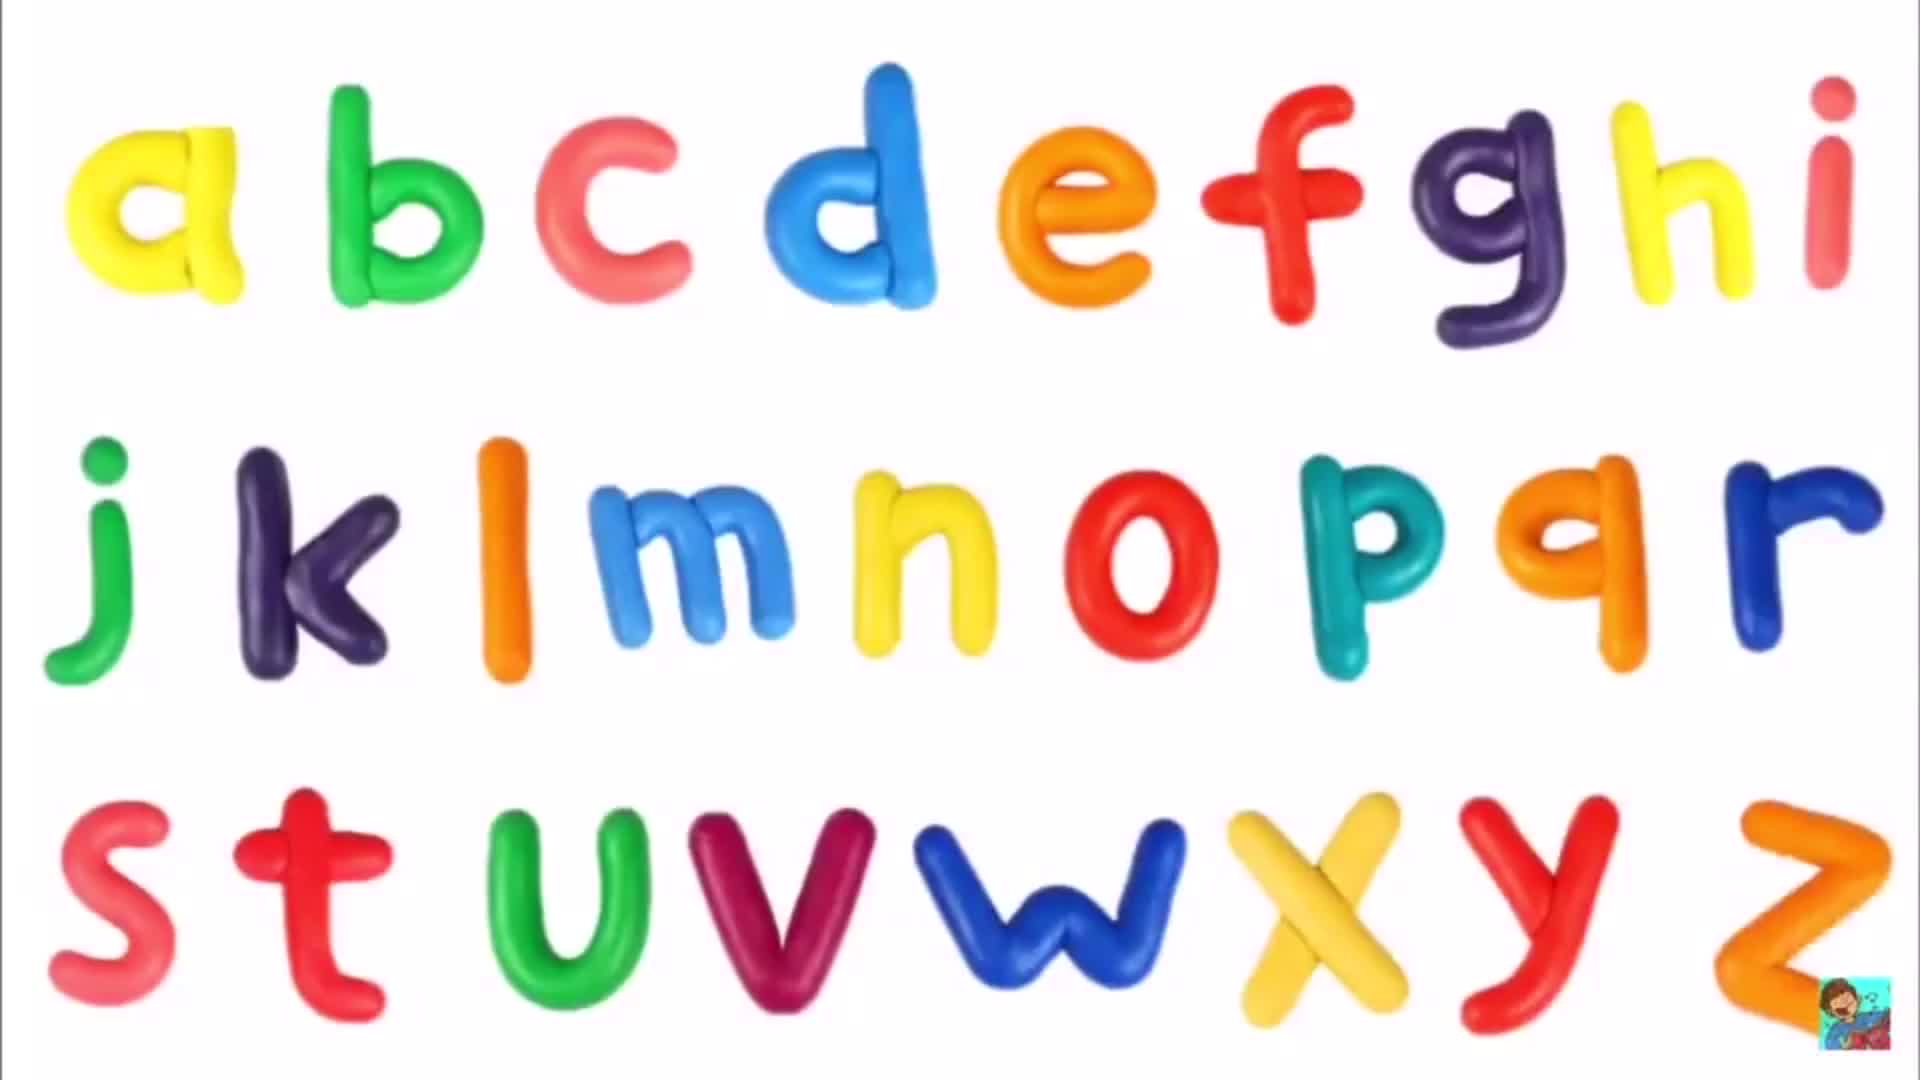 Classic Alphabet Song S Remix Leaves The Internet In A Rage Cnn